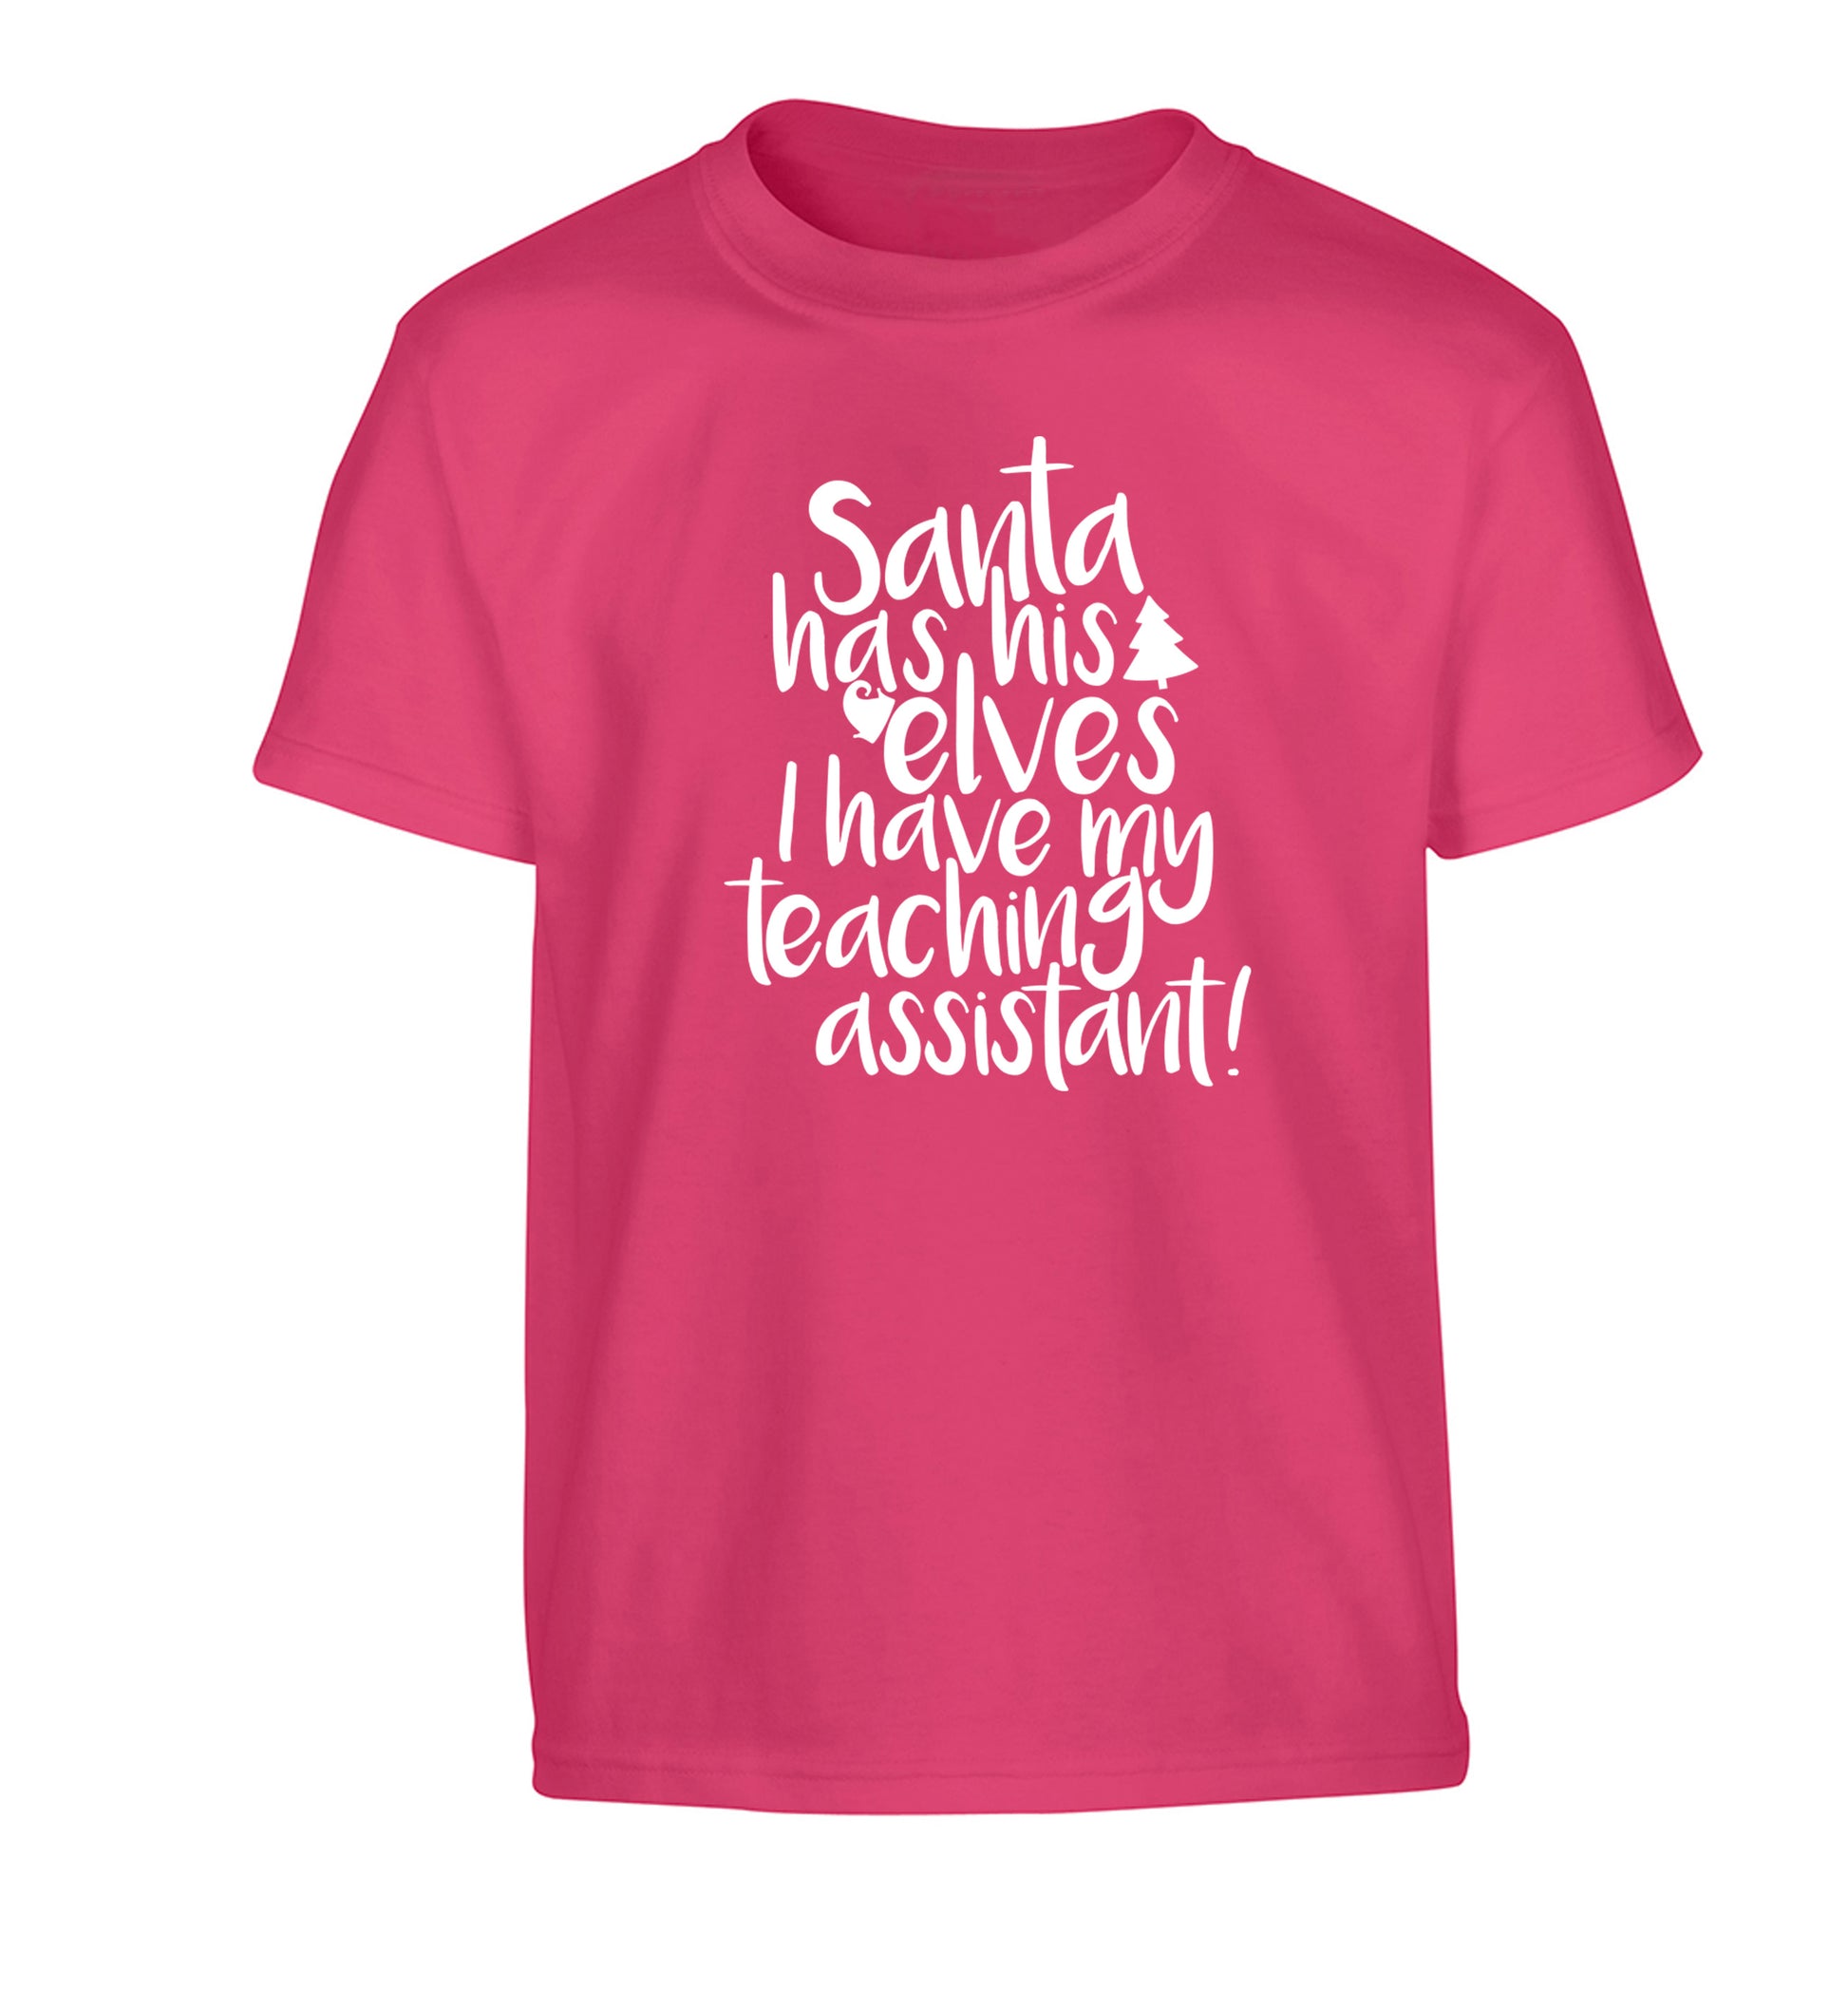 Santa has his elves I have my teaching assistant Children's pink Tshirt 12-14 Years